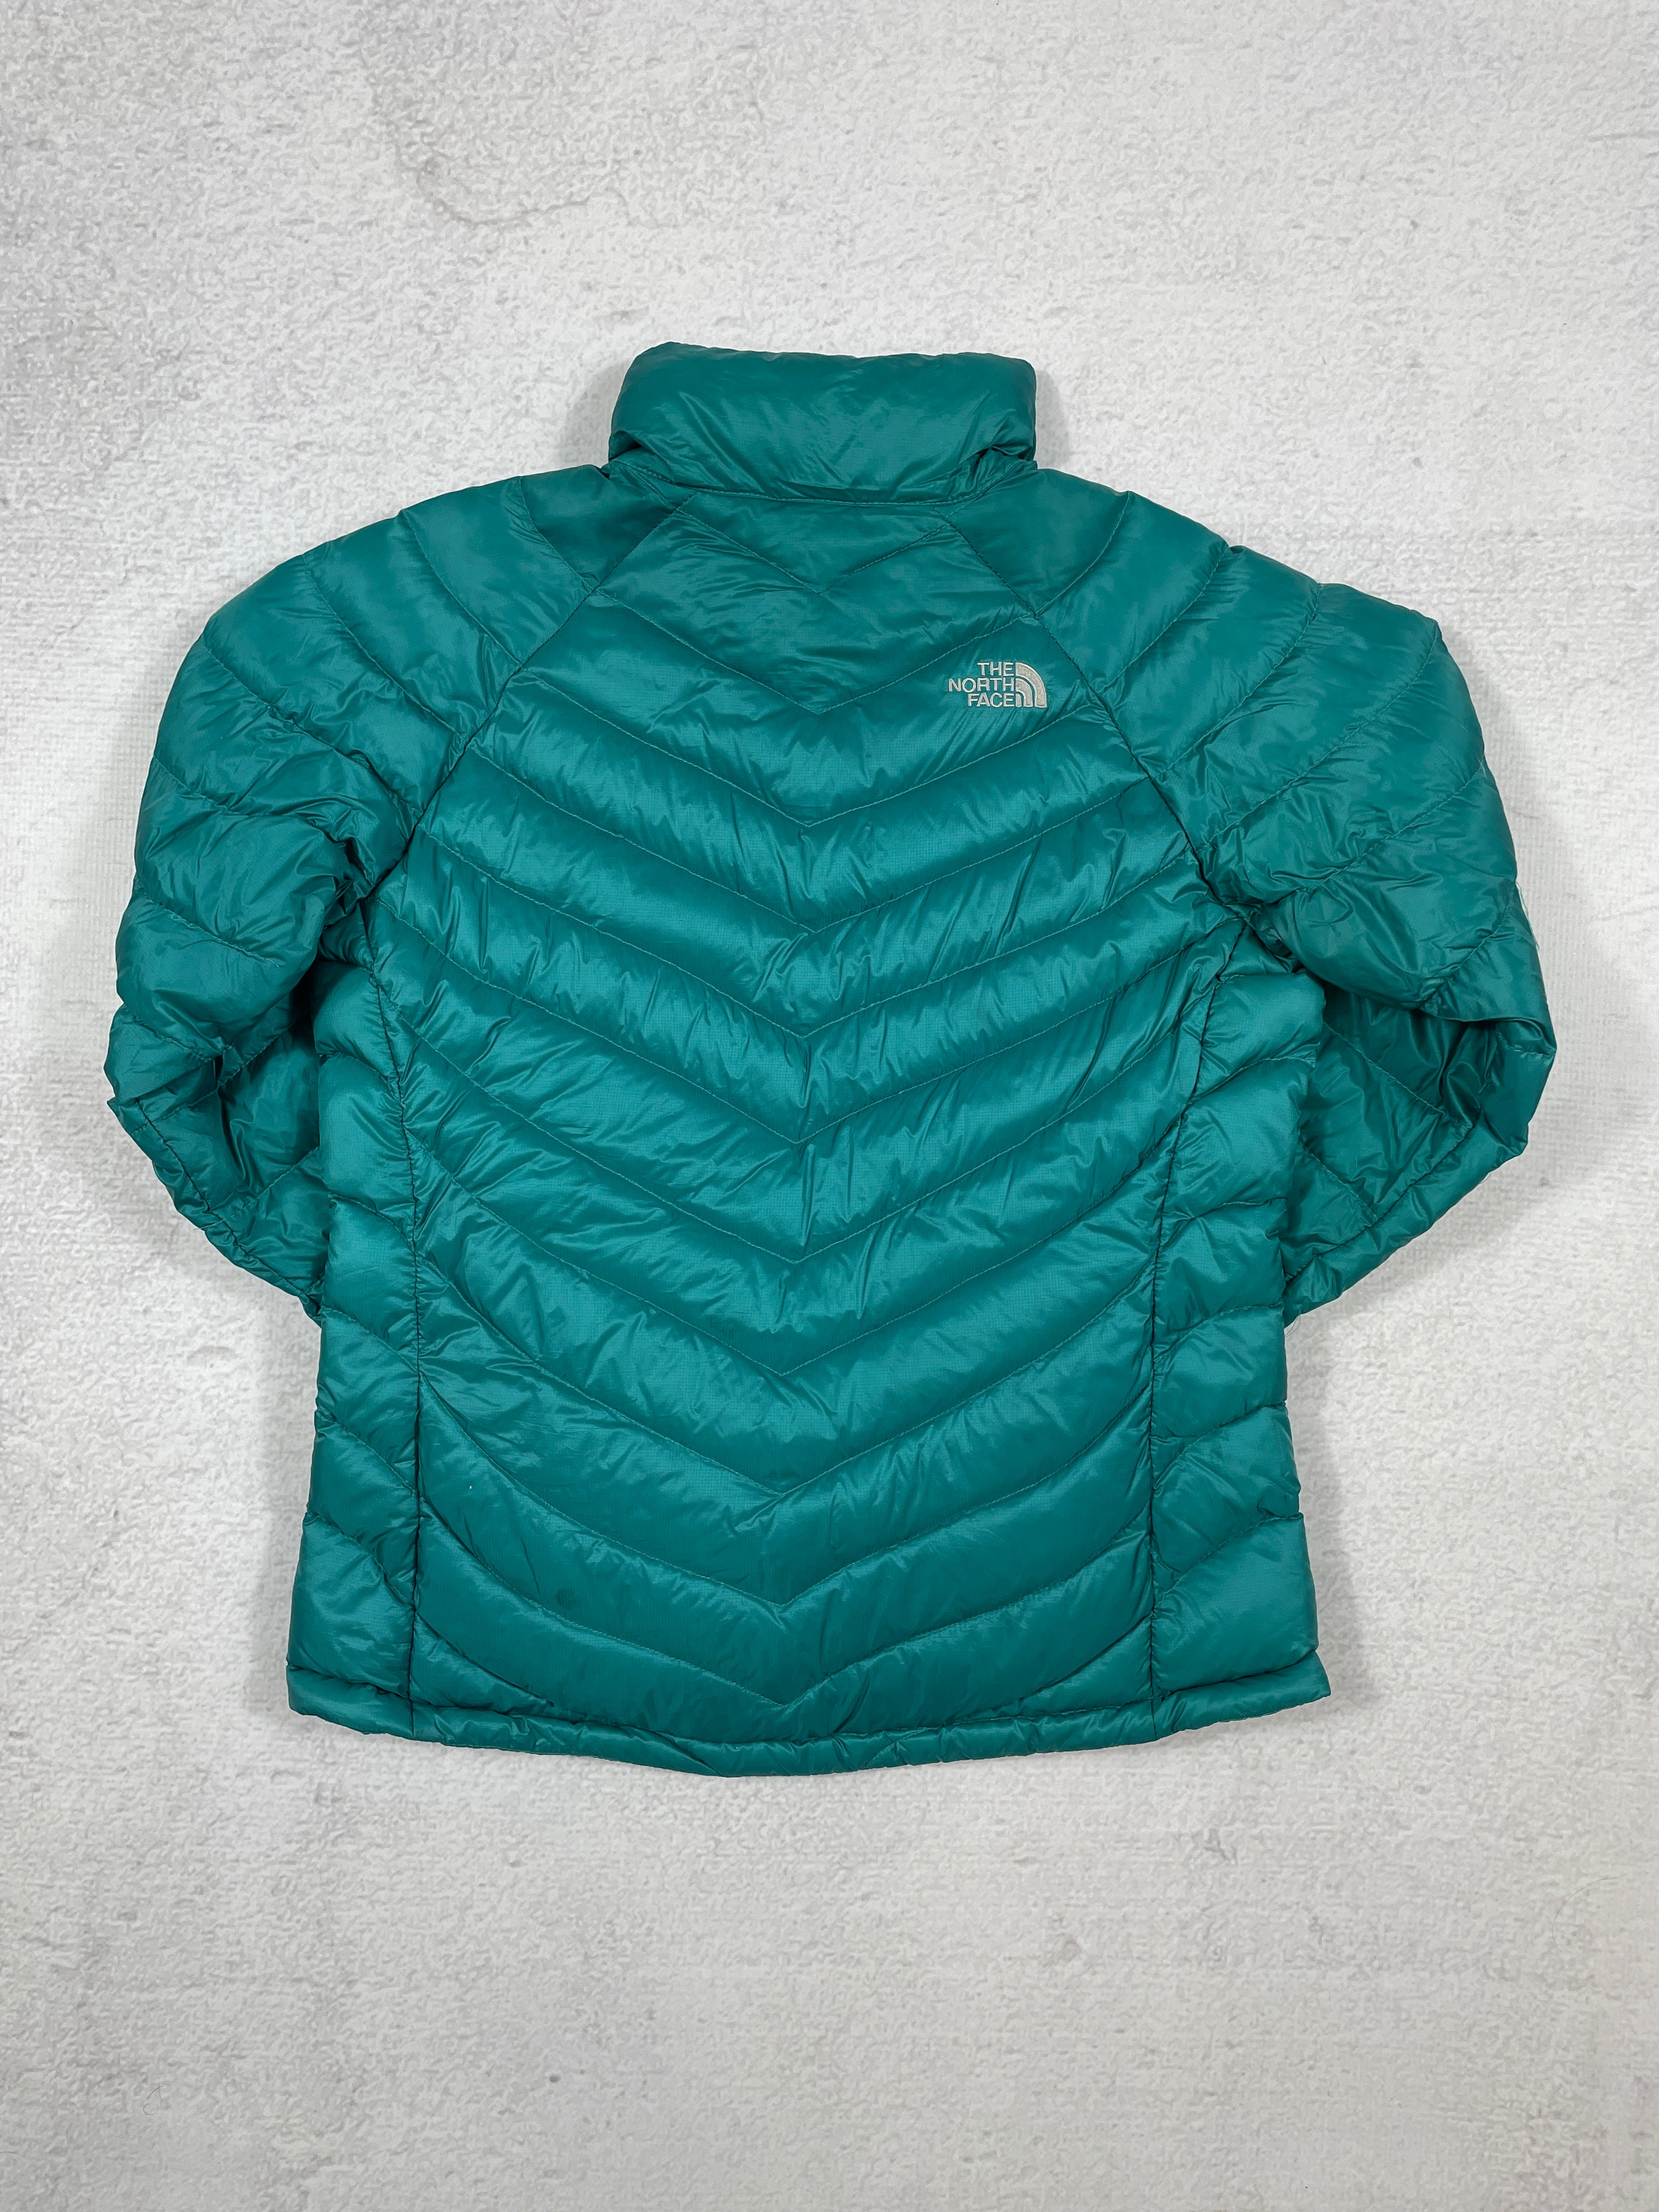 Vintage The North Face 800 Series Puffer Jacket - Women's Small